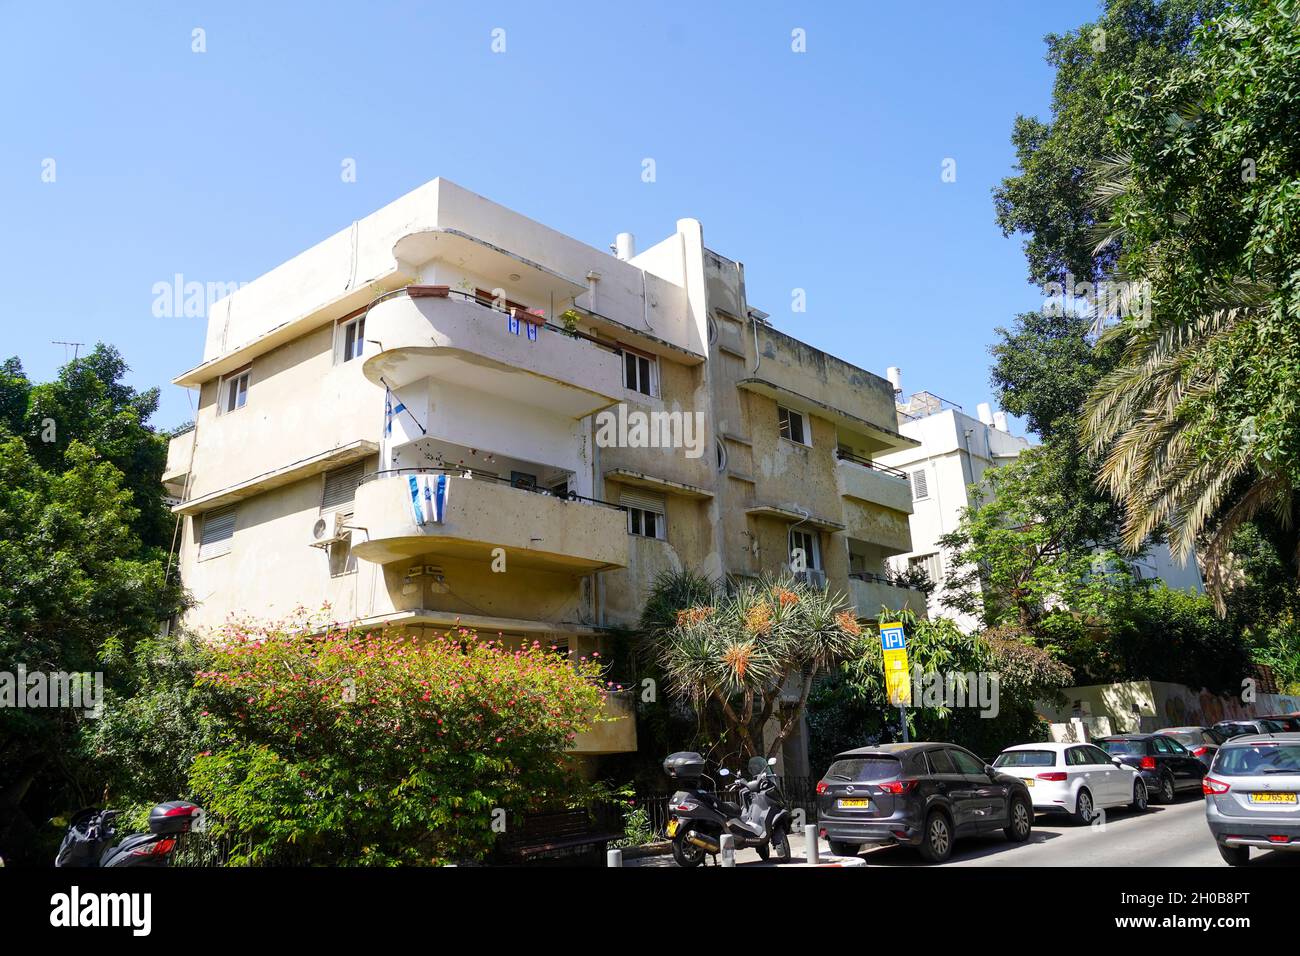 Bauhaus Architecture at 16 Smolensky, Tel Aviv White City. The White City refers to a collection of over 4,000 buildings built in the Bauhaus or Inter Stock Photo